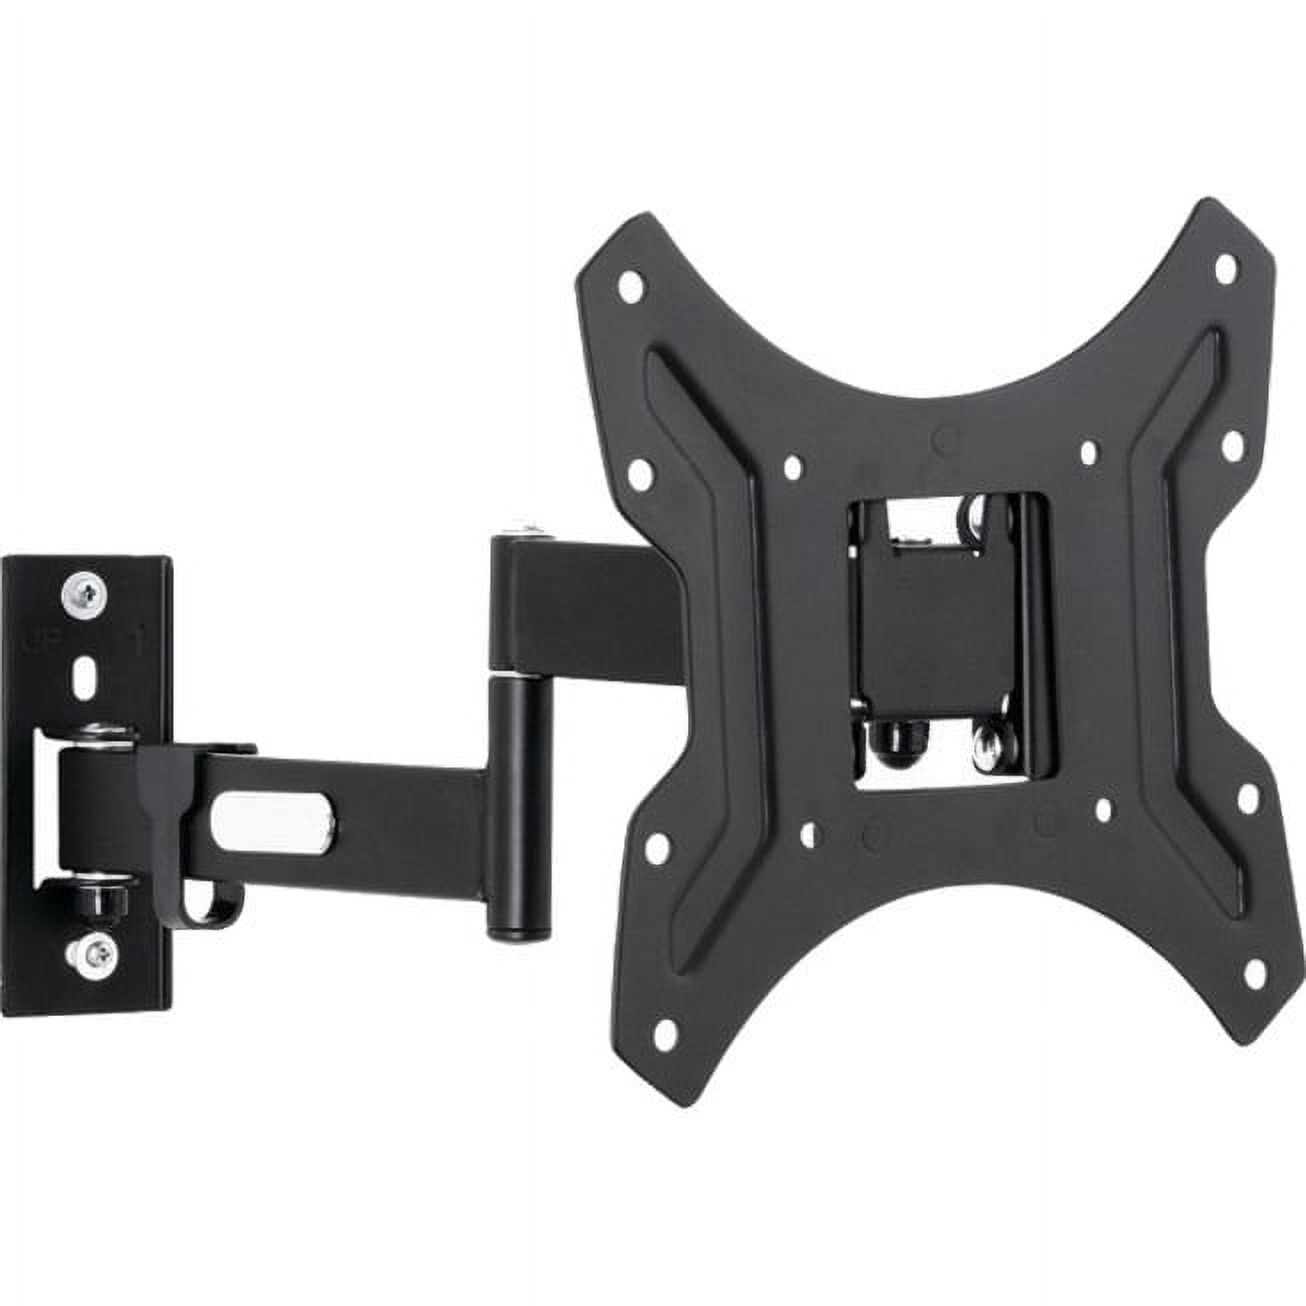 Zax Wall Mount for TV - image 1 of 1